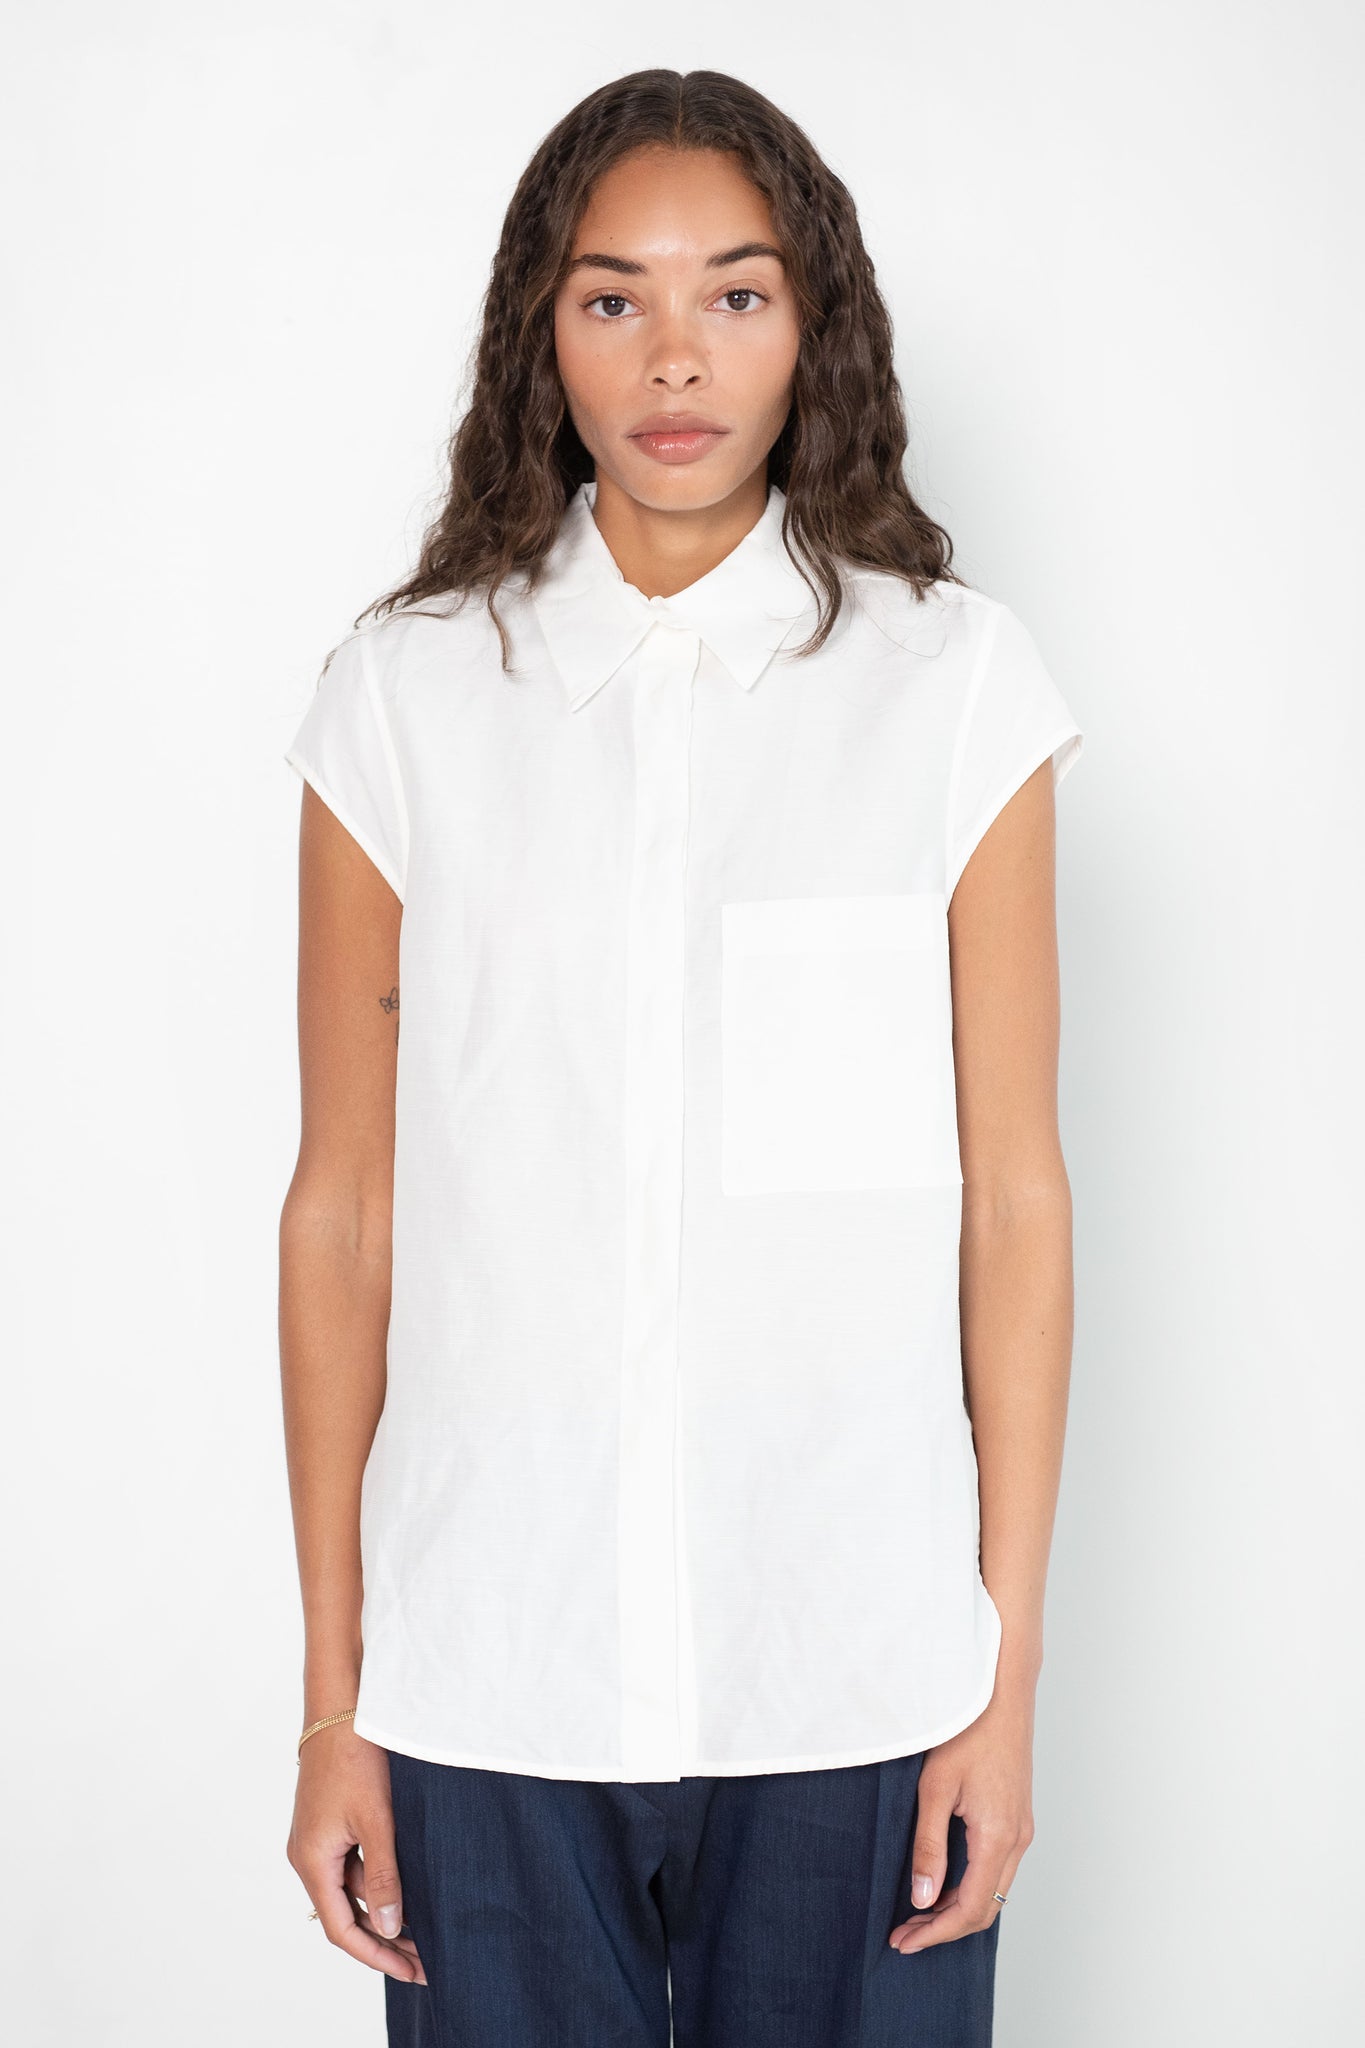 Christian Wijnants - Taung Top, White